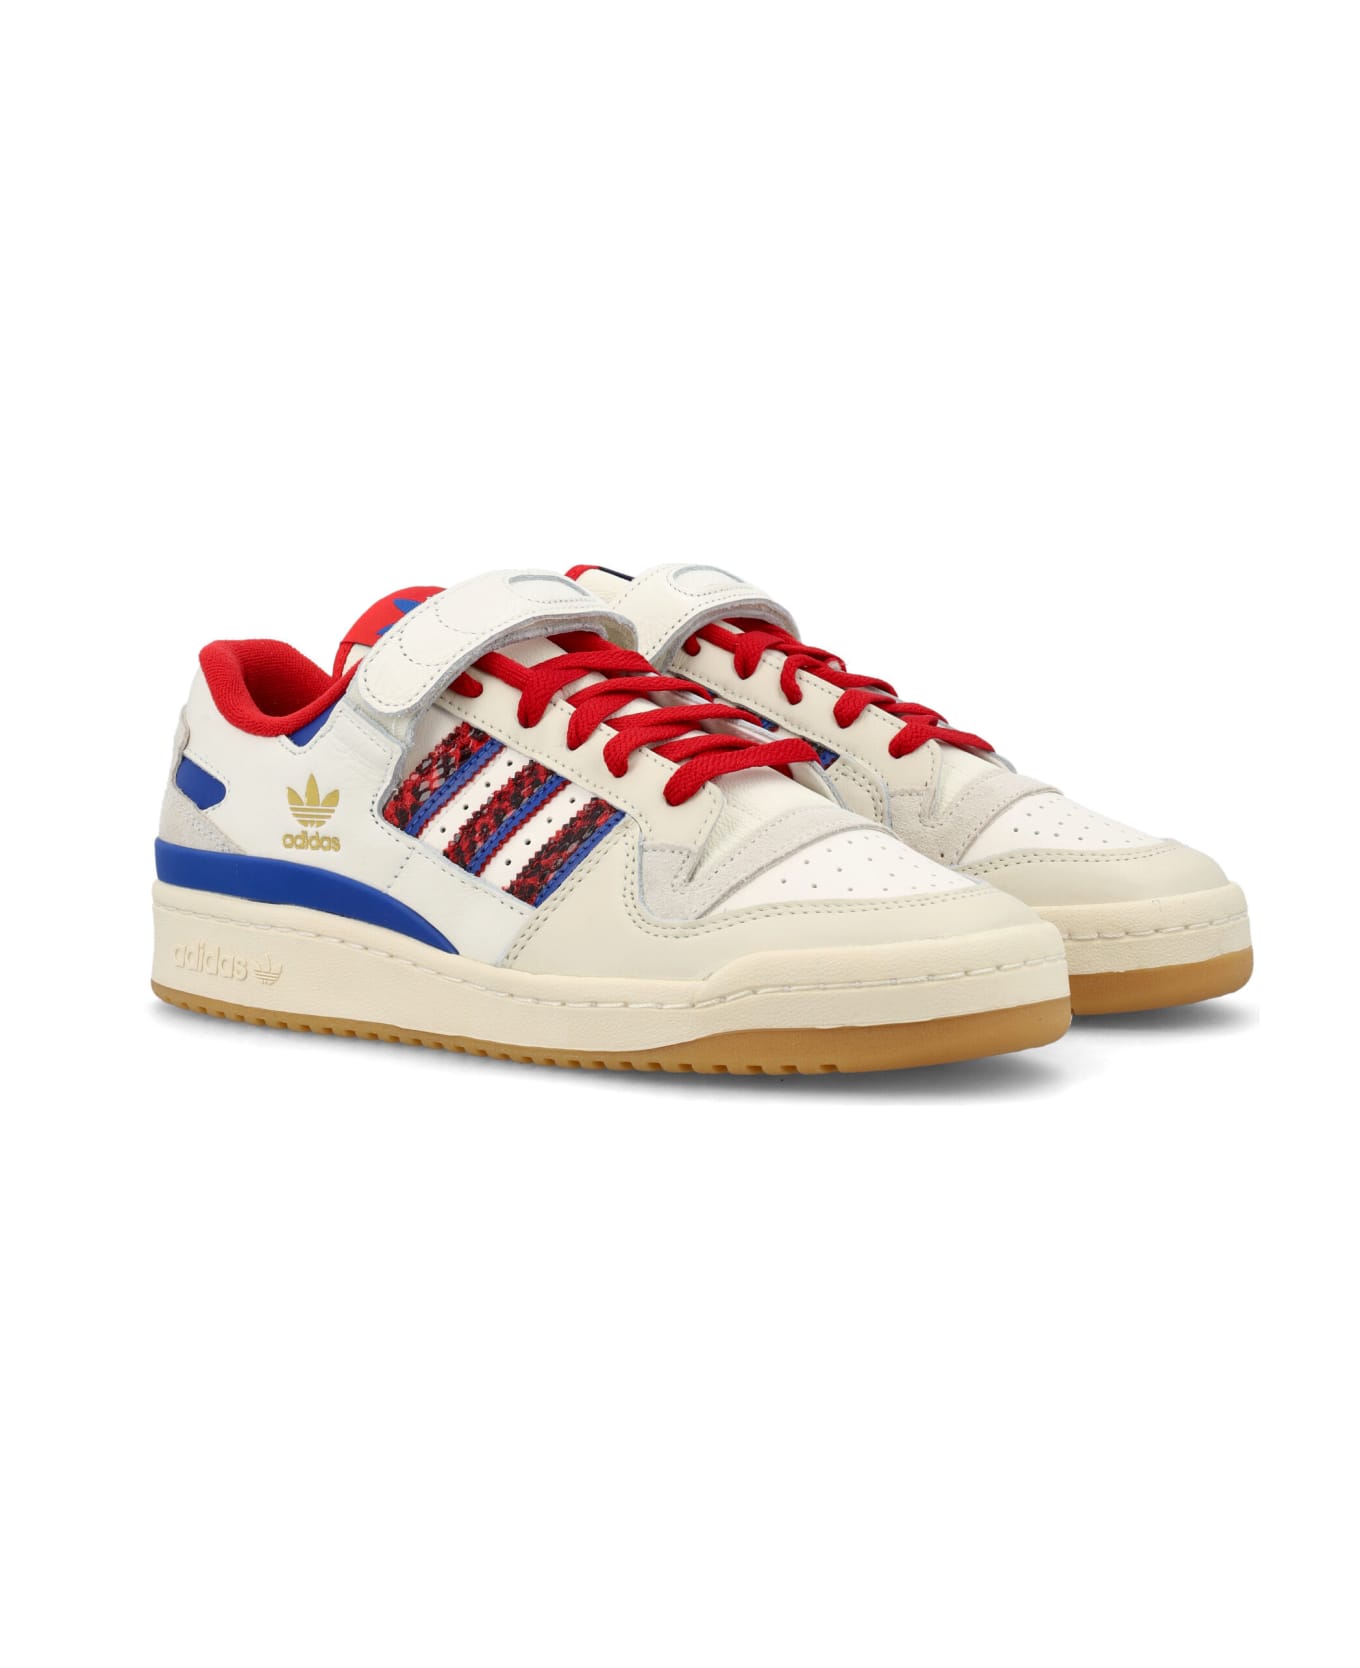 Adidas Originals Forum 84 Low-top Sneakers - WHITE RED